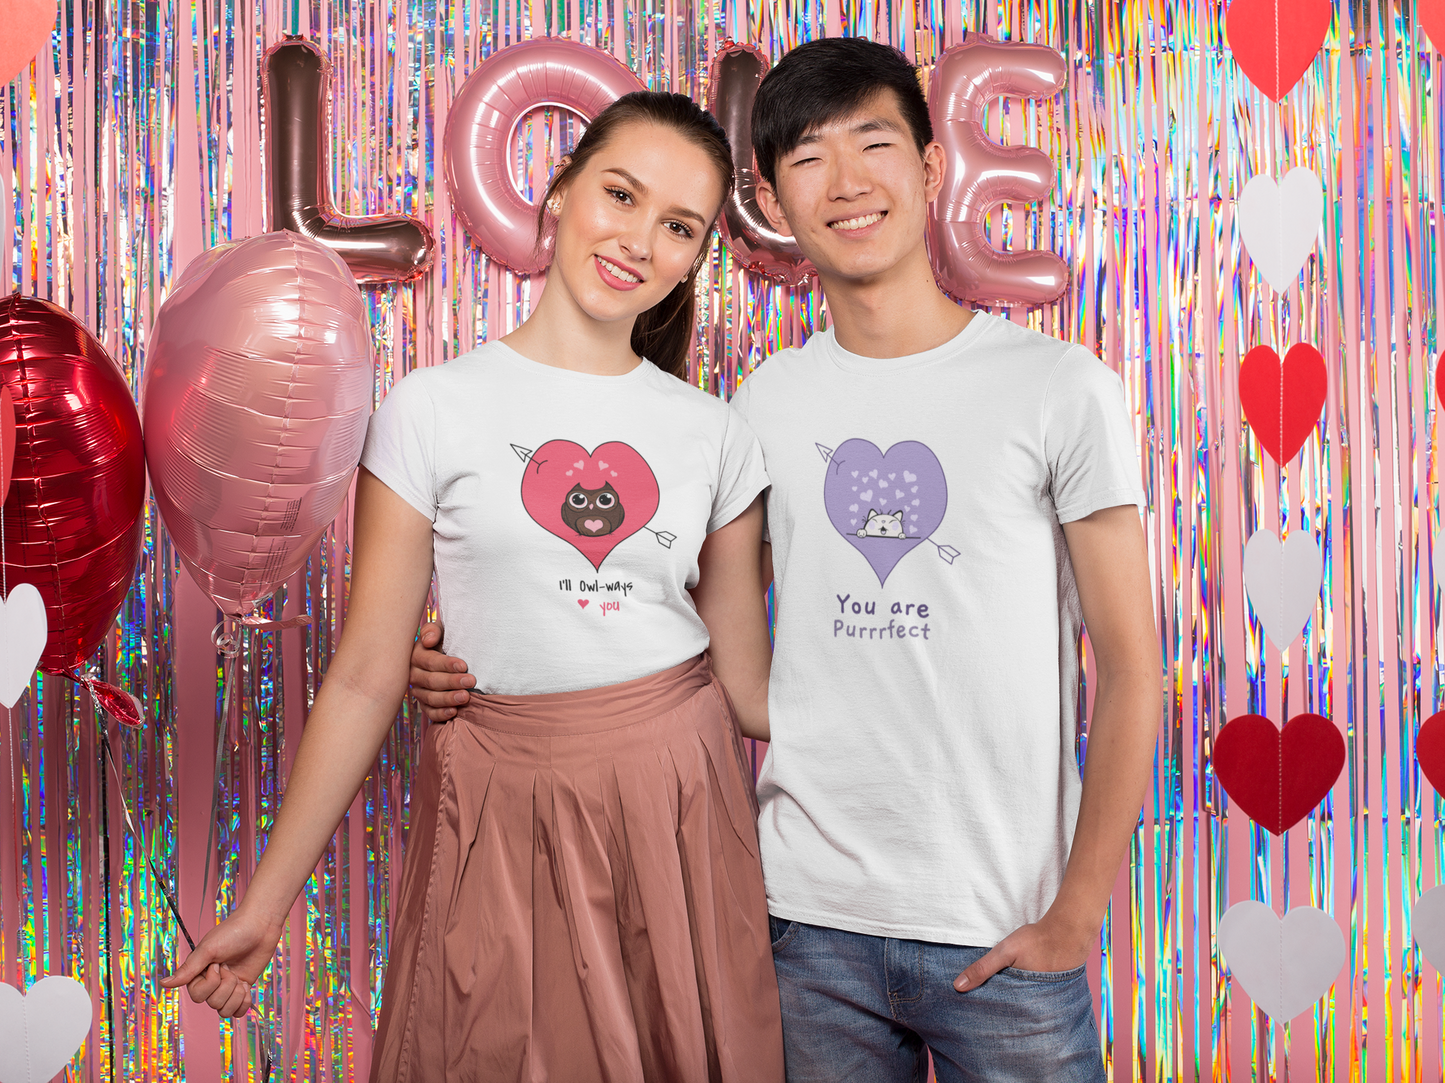 PERFECT US couple t-shirt